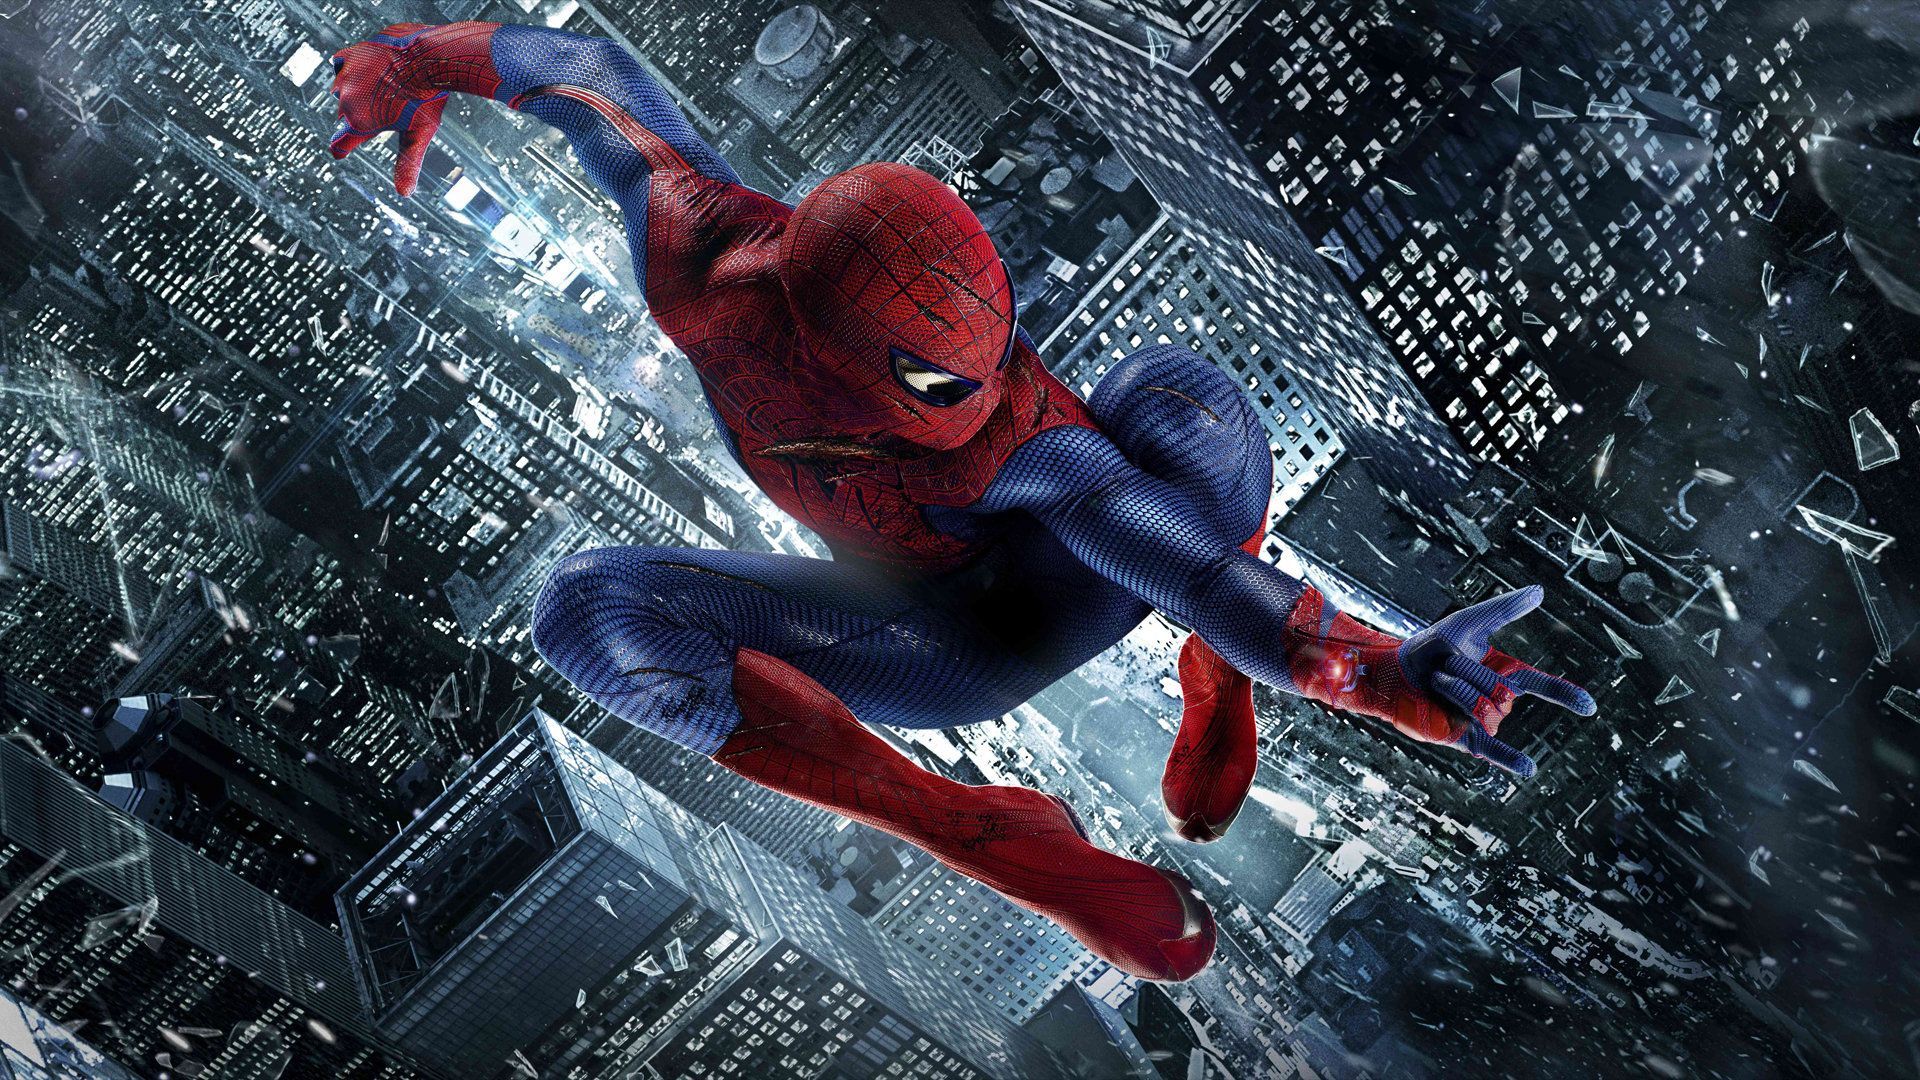 the amazing spiderman 2 movie wallpapers..... http://www.hdwallpapersnew/th...